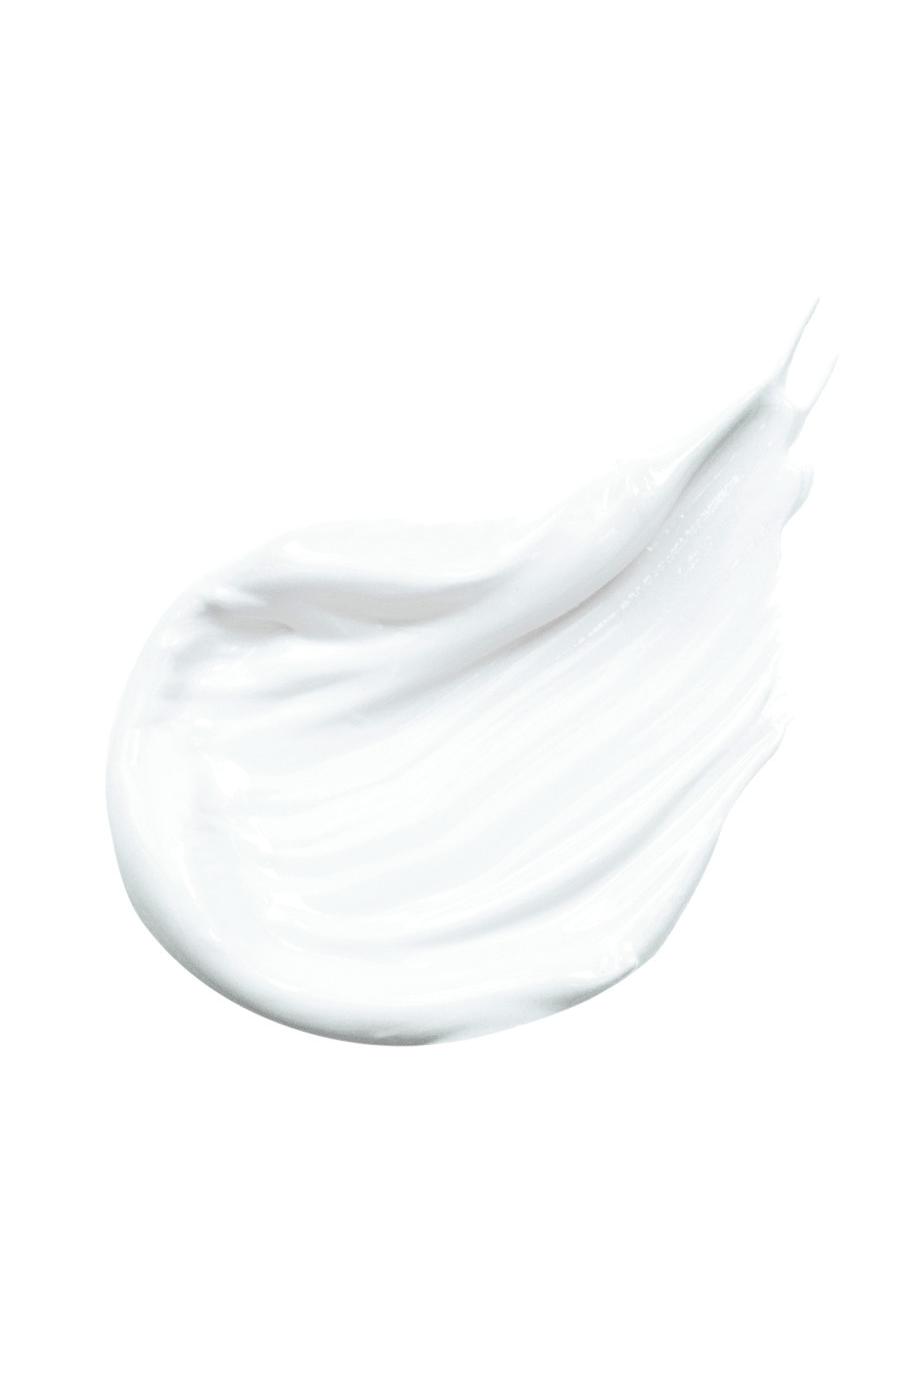 Curel Ultra Healing Lotion; image 2 of 16